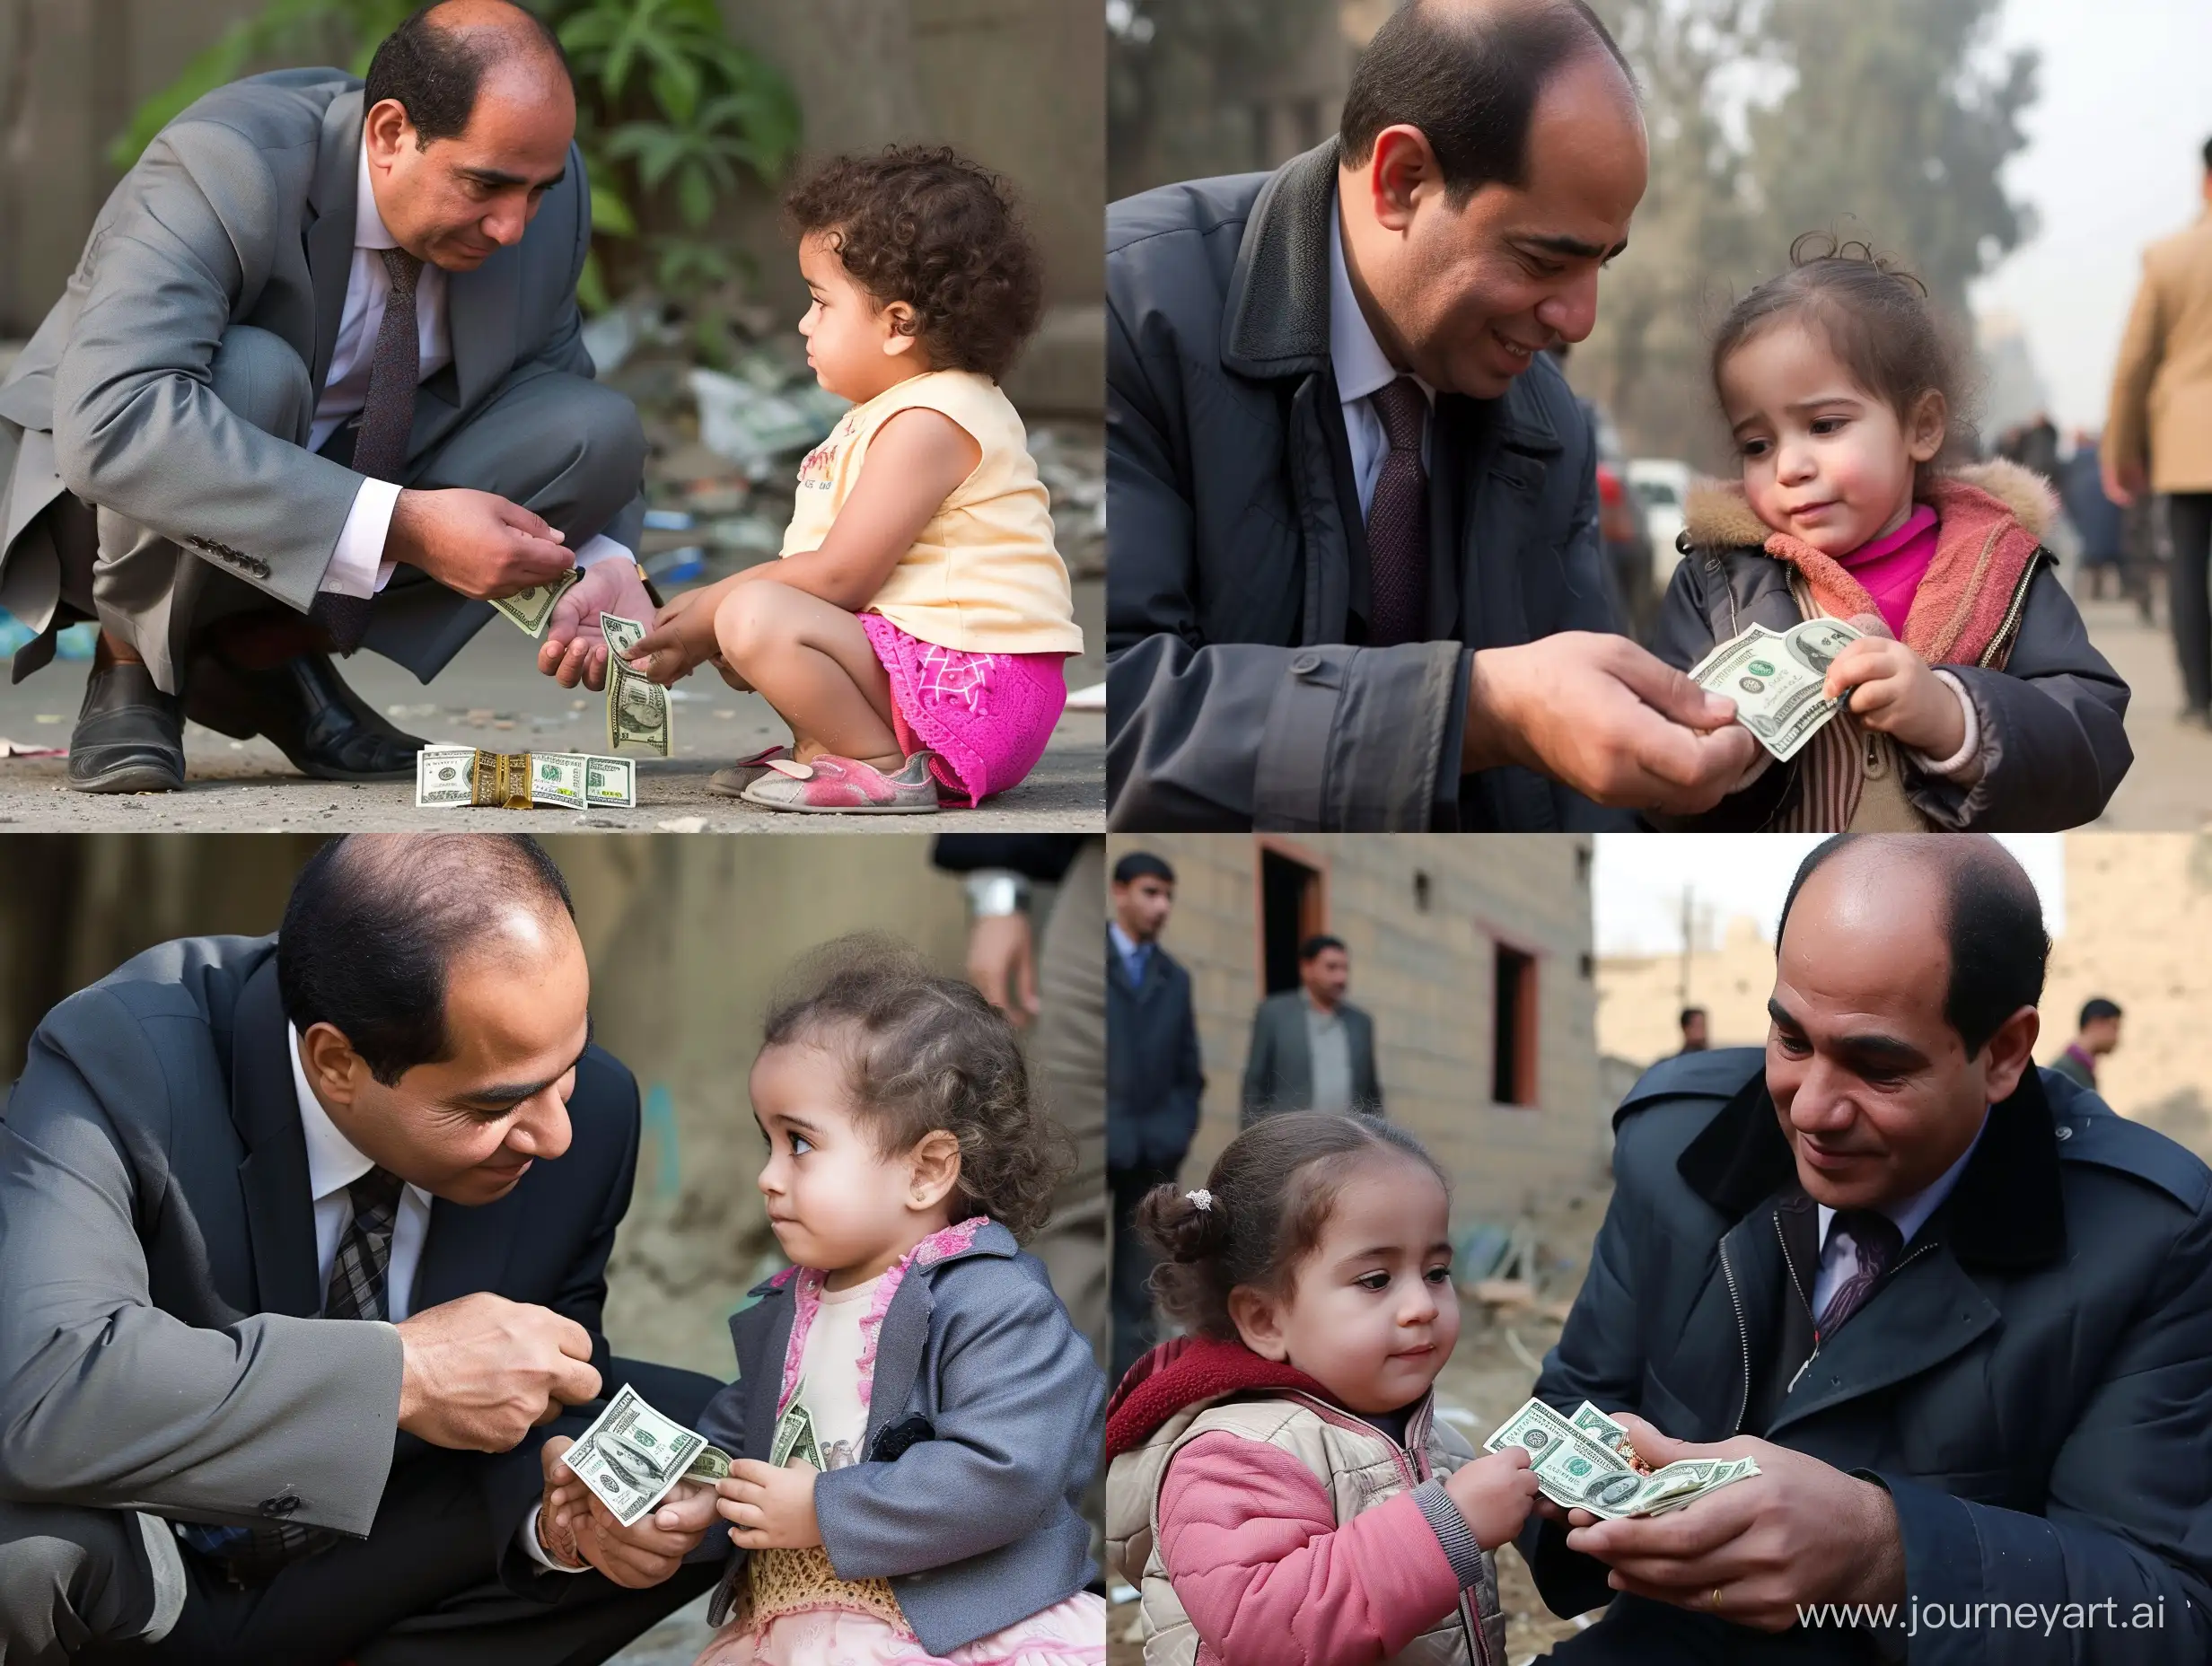 Abdel fattah el sisi stealing from a small child some dollars 